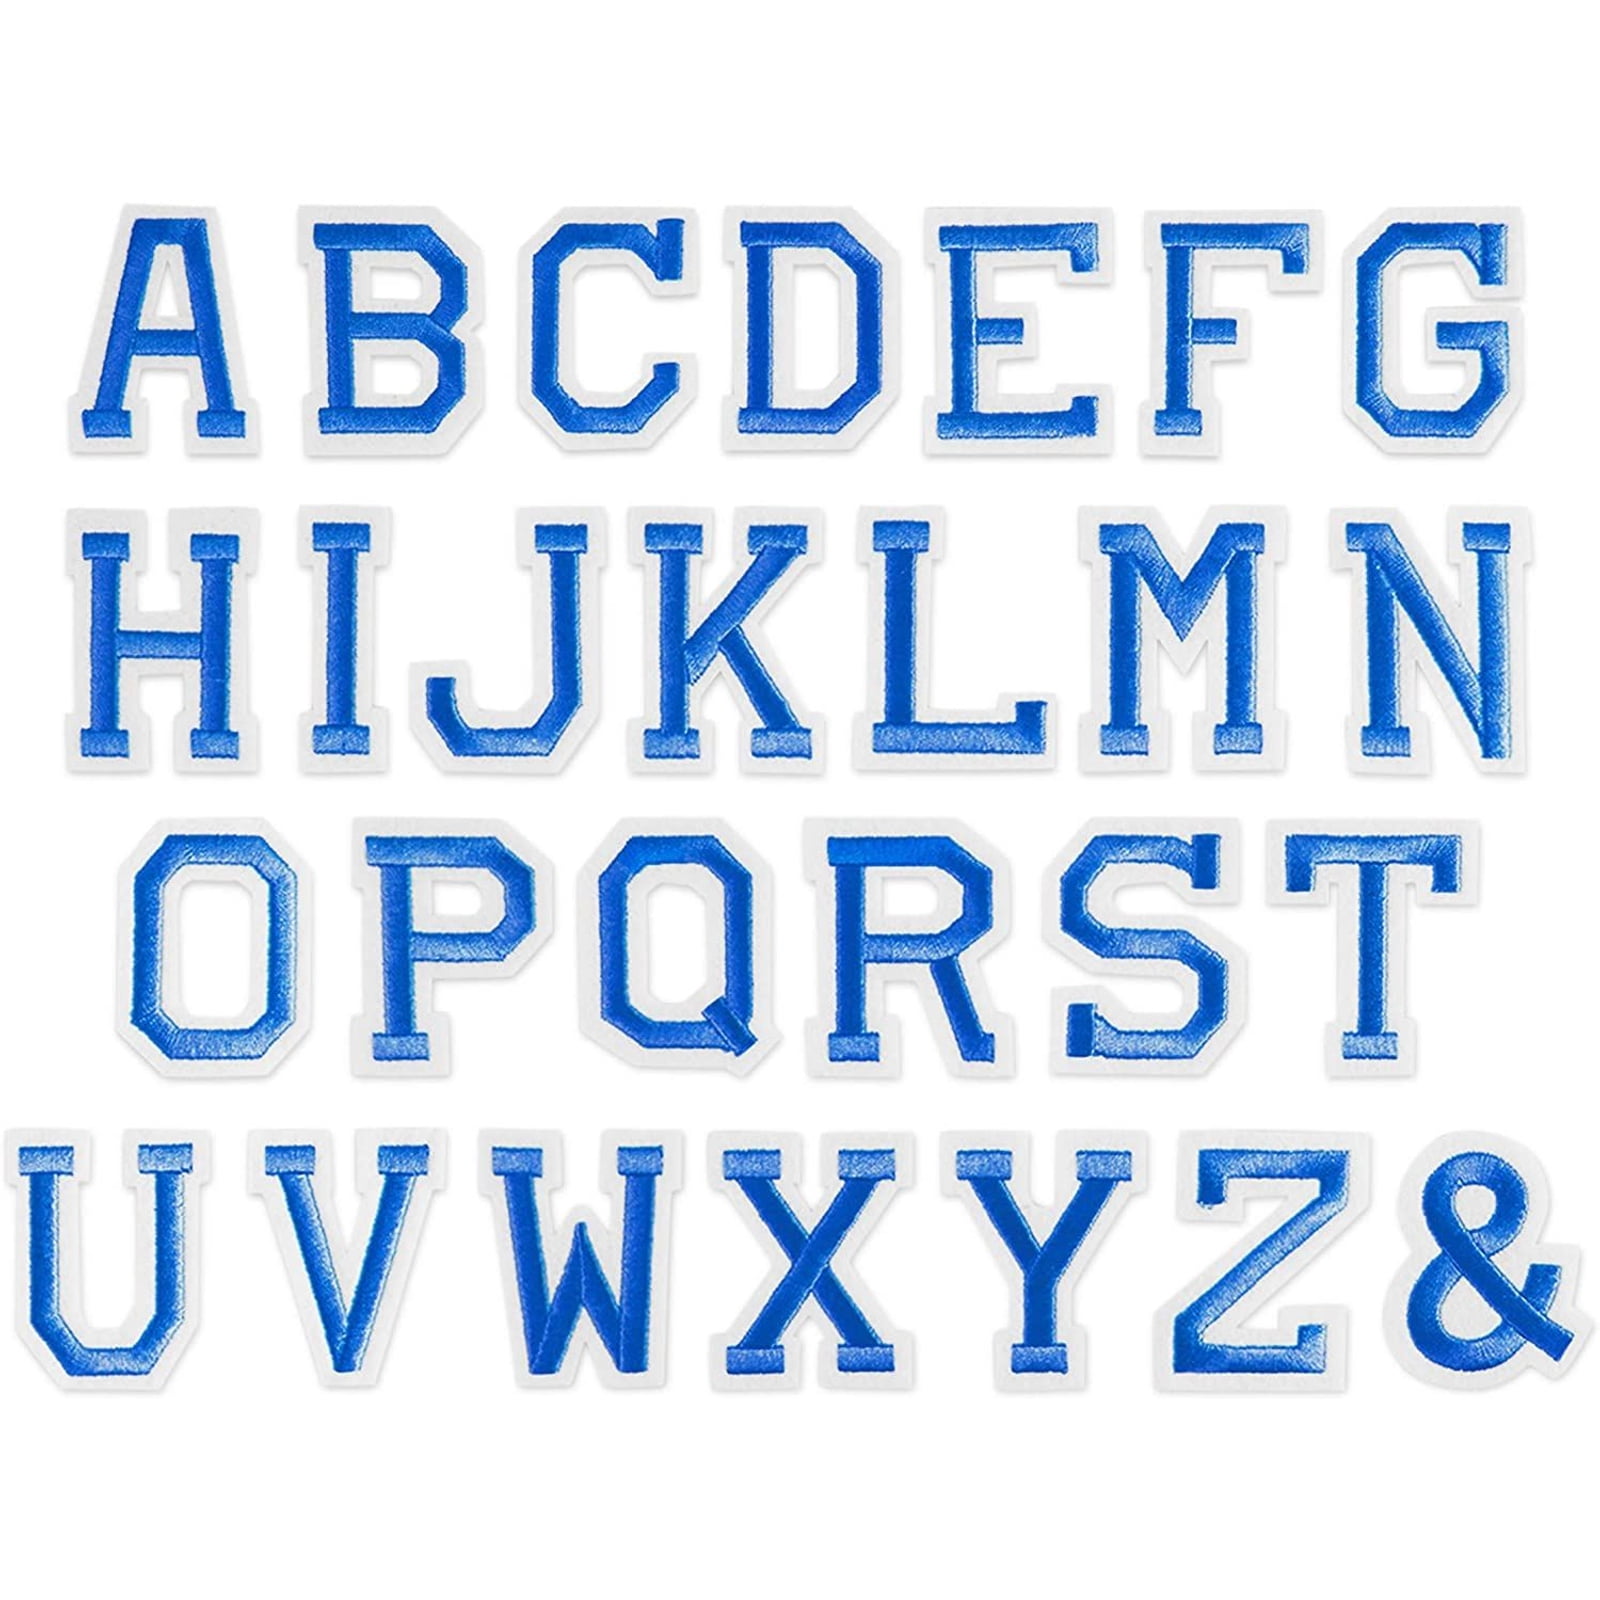 26 Pcs Blue Letters Sew Iron On Patches A-Z Alphabet Patches Stickers DIY Appliques Patches Badge Embroidery Repair Decorative Fabric Patches for Clothes T-Shirt Backpack Cap Shoes Jeans